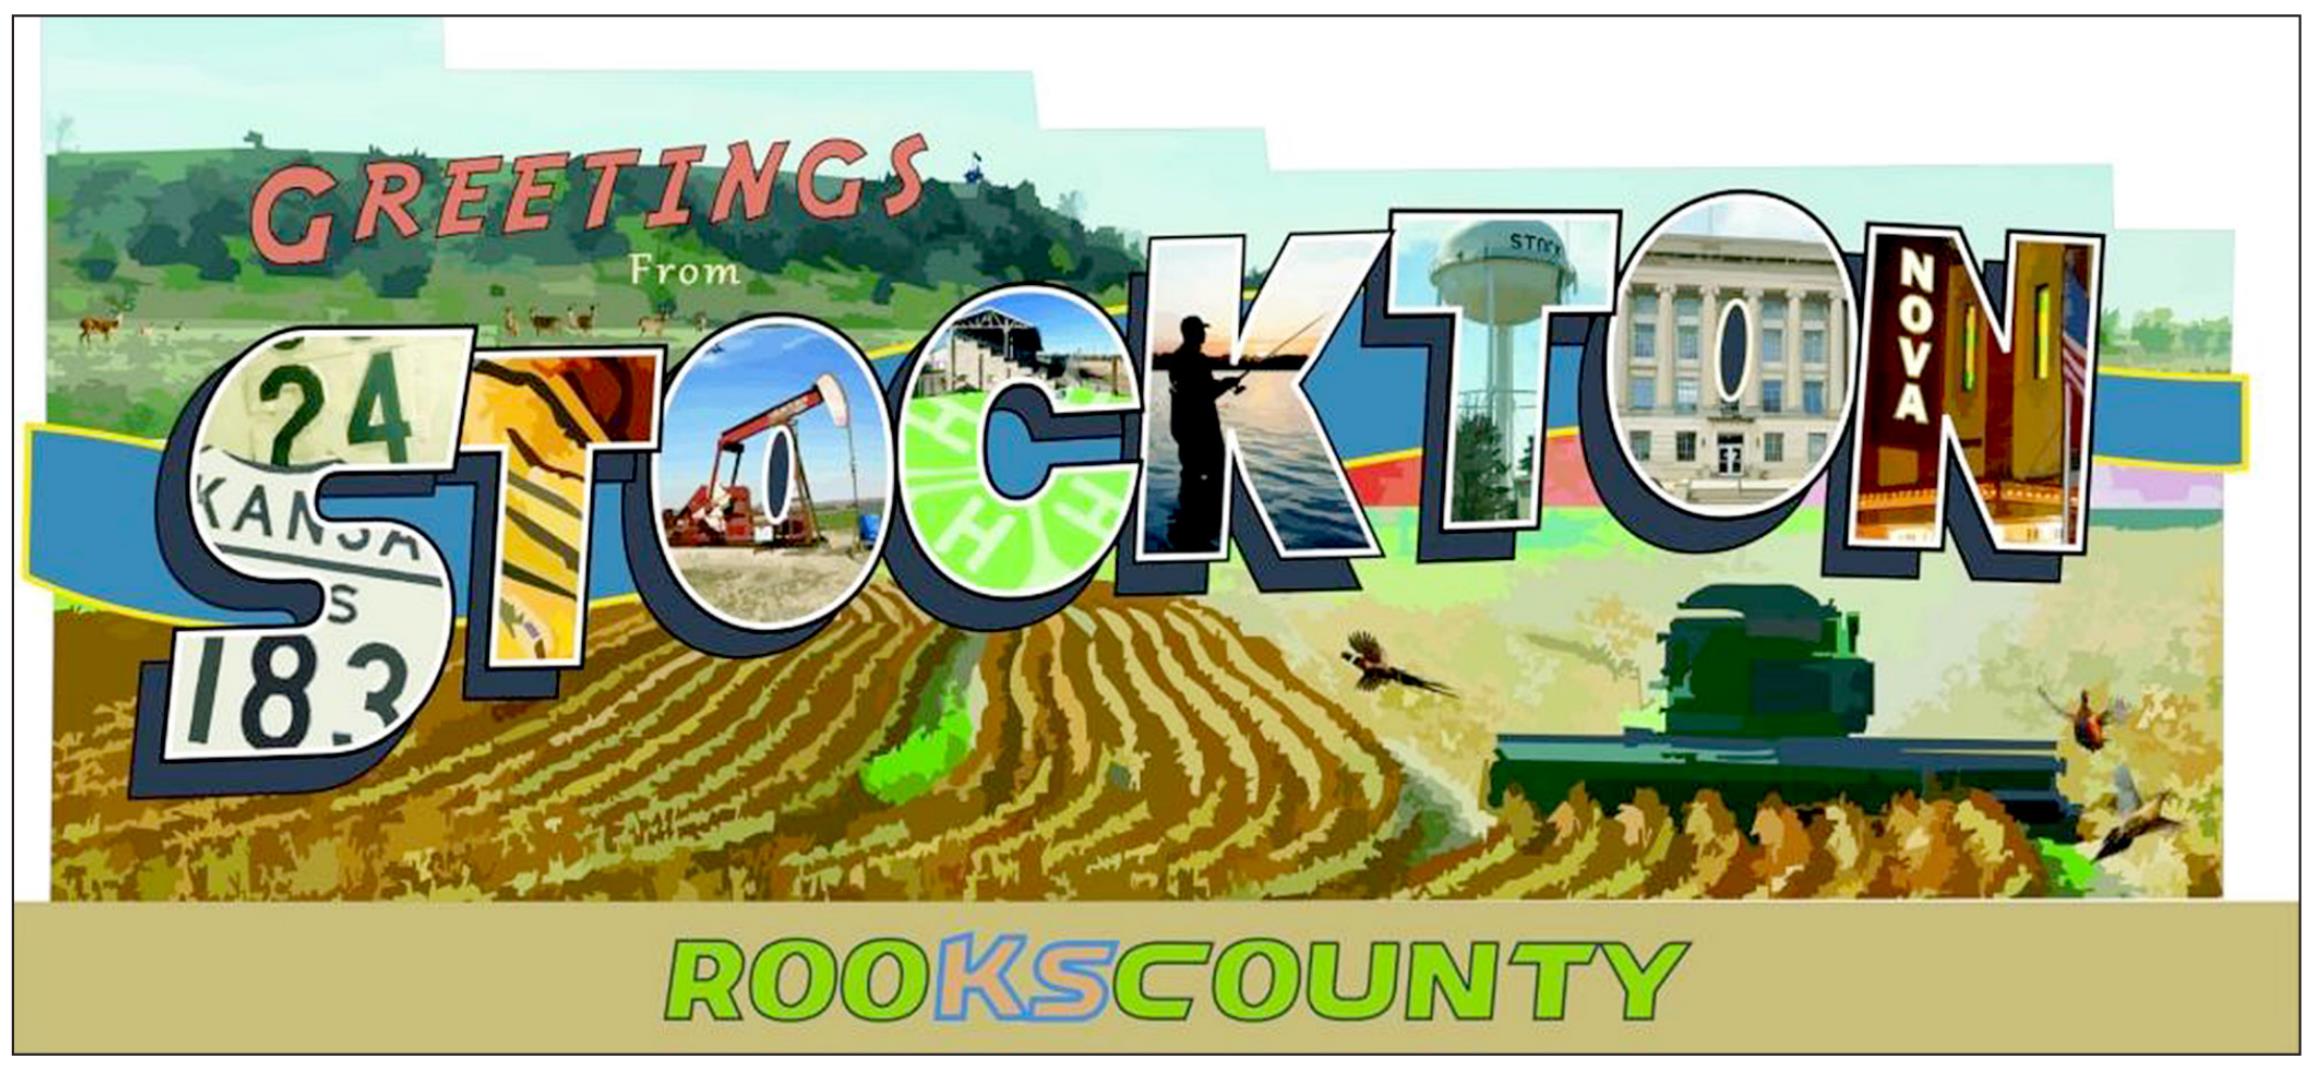 NOSTALGIC POSTCARD — The artist’s illustration of a large mural shows each letter of STOCKTON depicting various icons and images of our life in Rooks County. This mural will be painted on the bare wall at the intersection of U.S. Highways 183 and 24. The wall, owned by Ron Gallaway, is a “blank canvas” just waiting for a colorful greeting! This mural is a project of RoCo Arts Council, Inc.